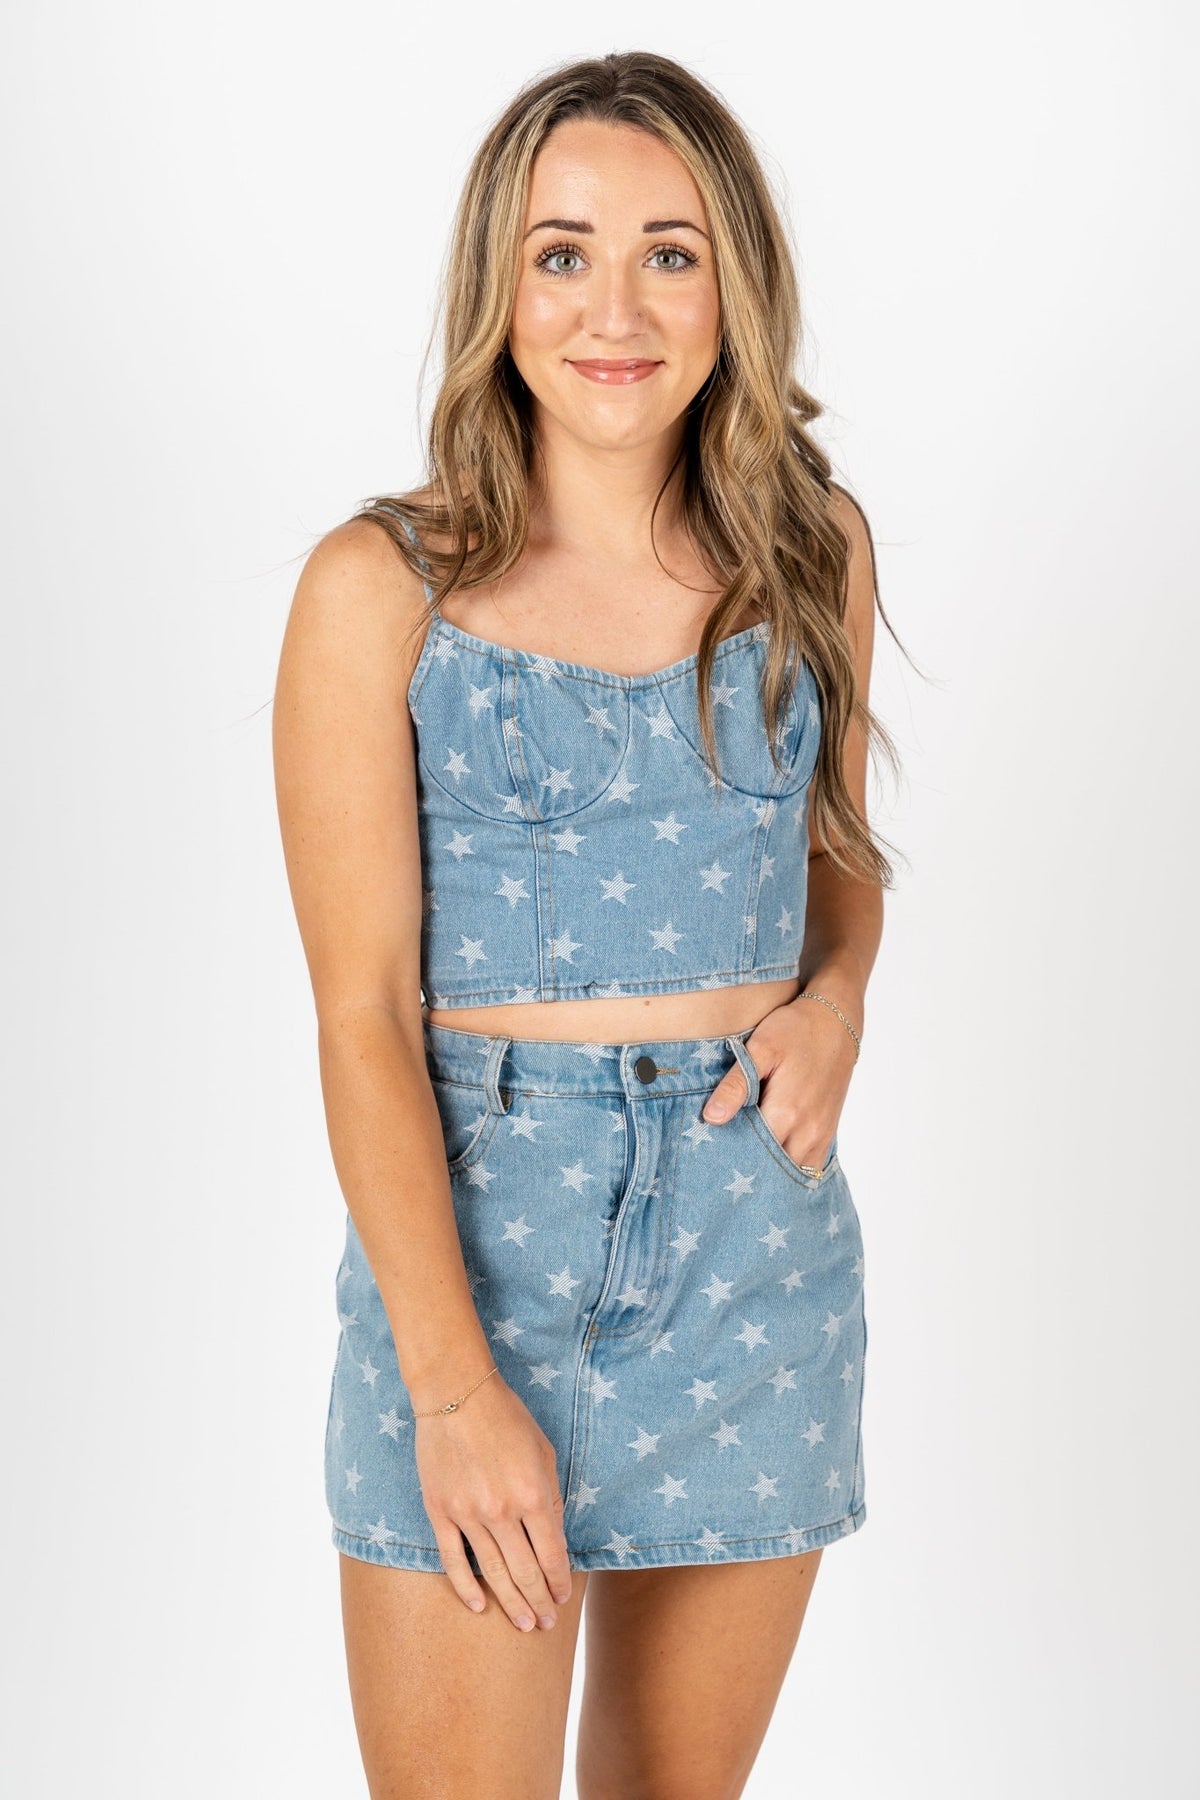 Star denim bustier tank top denim - Trendy Top - Cute American Summer Collection at Lush Fashion Lounge Boutique in Oklahoma City